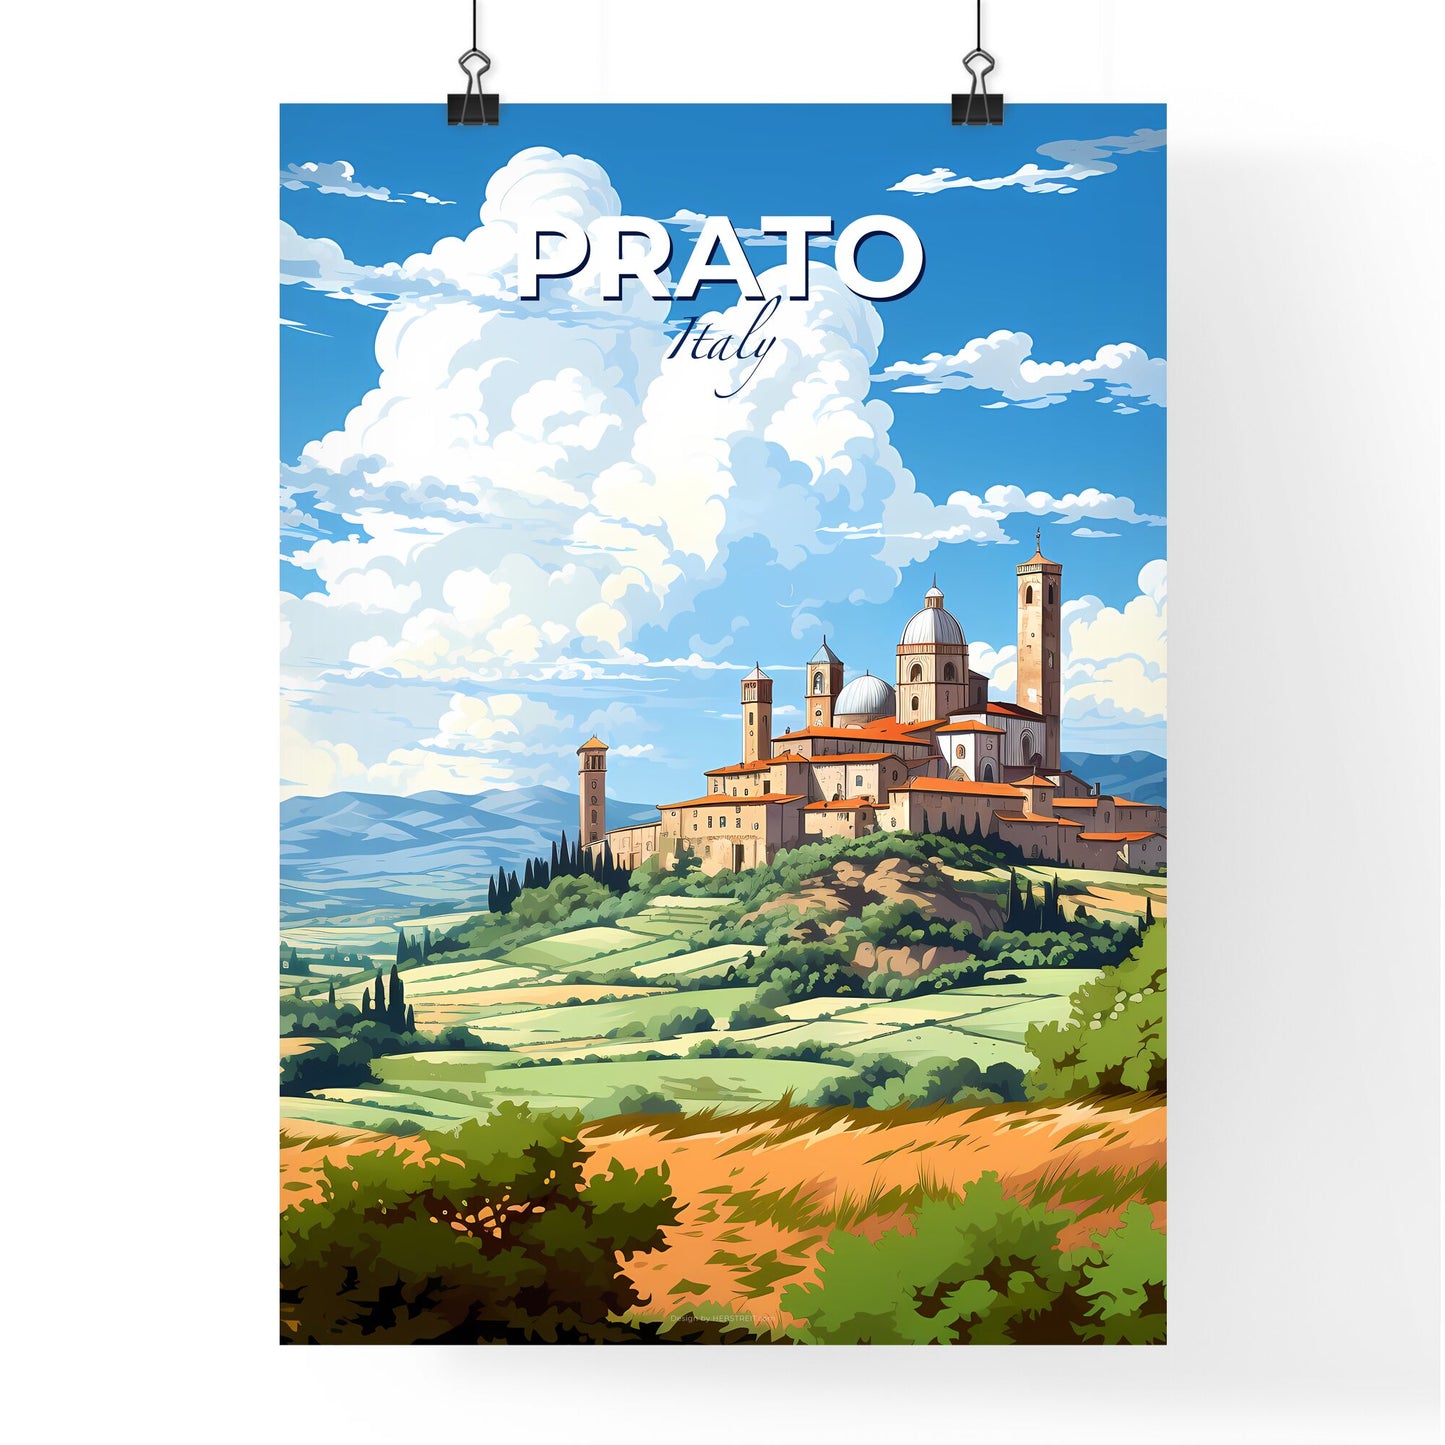 Prato, Italy, A Poster of a landscape with a castle and trees Default Title